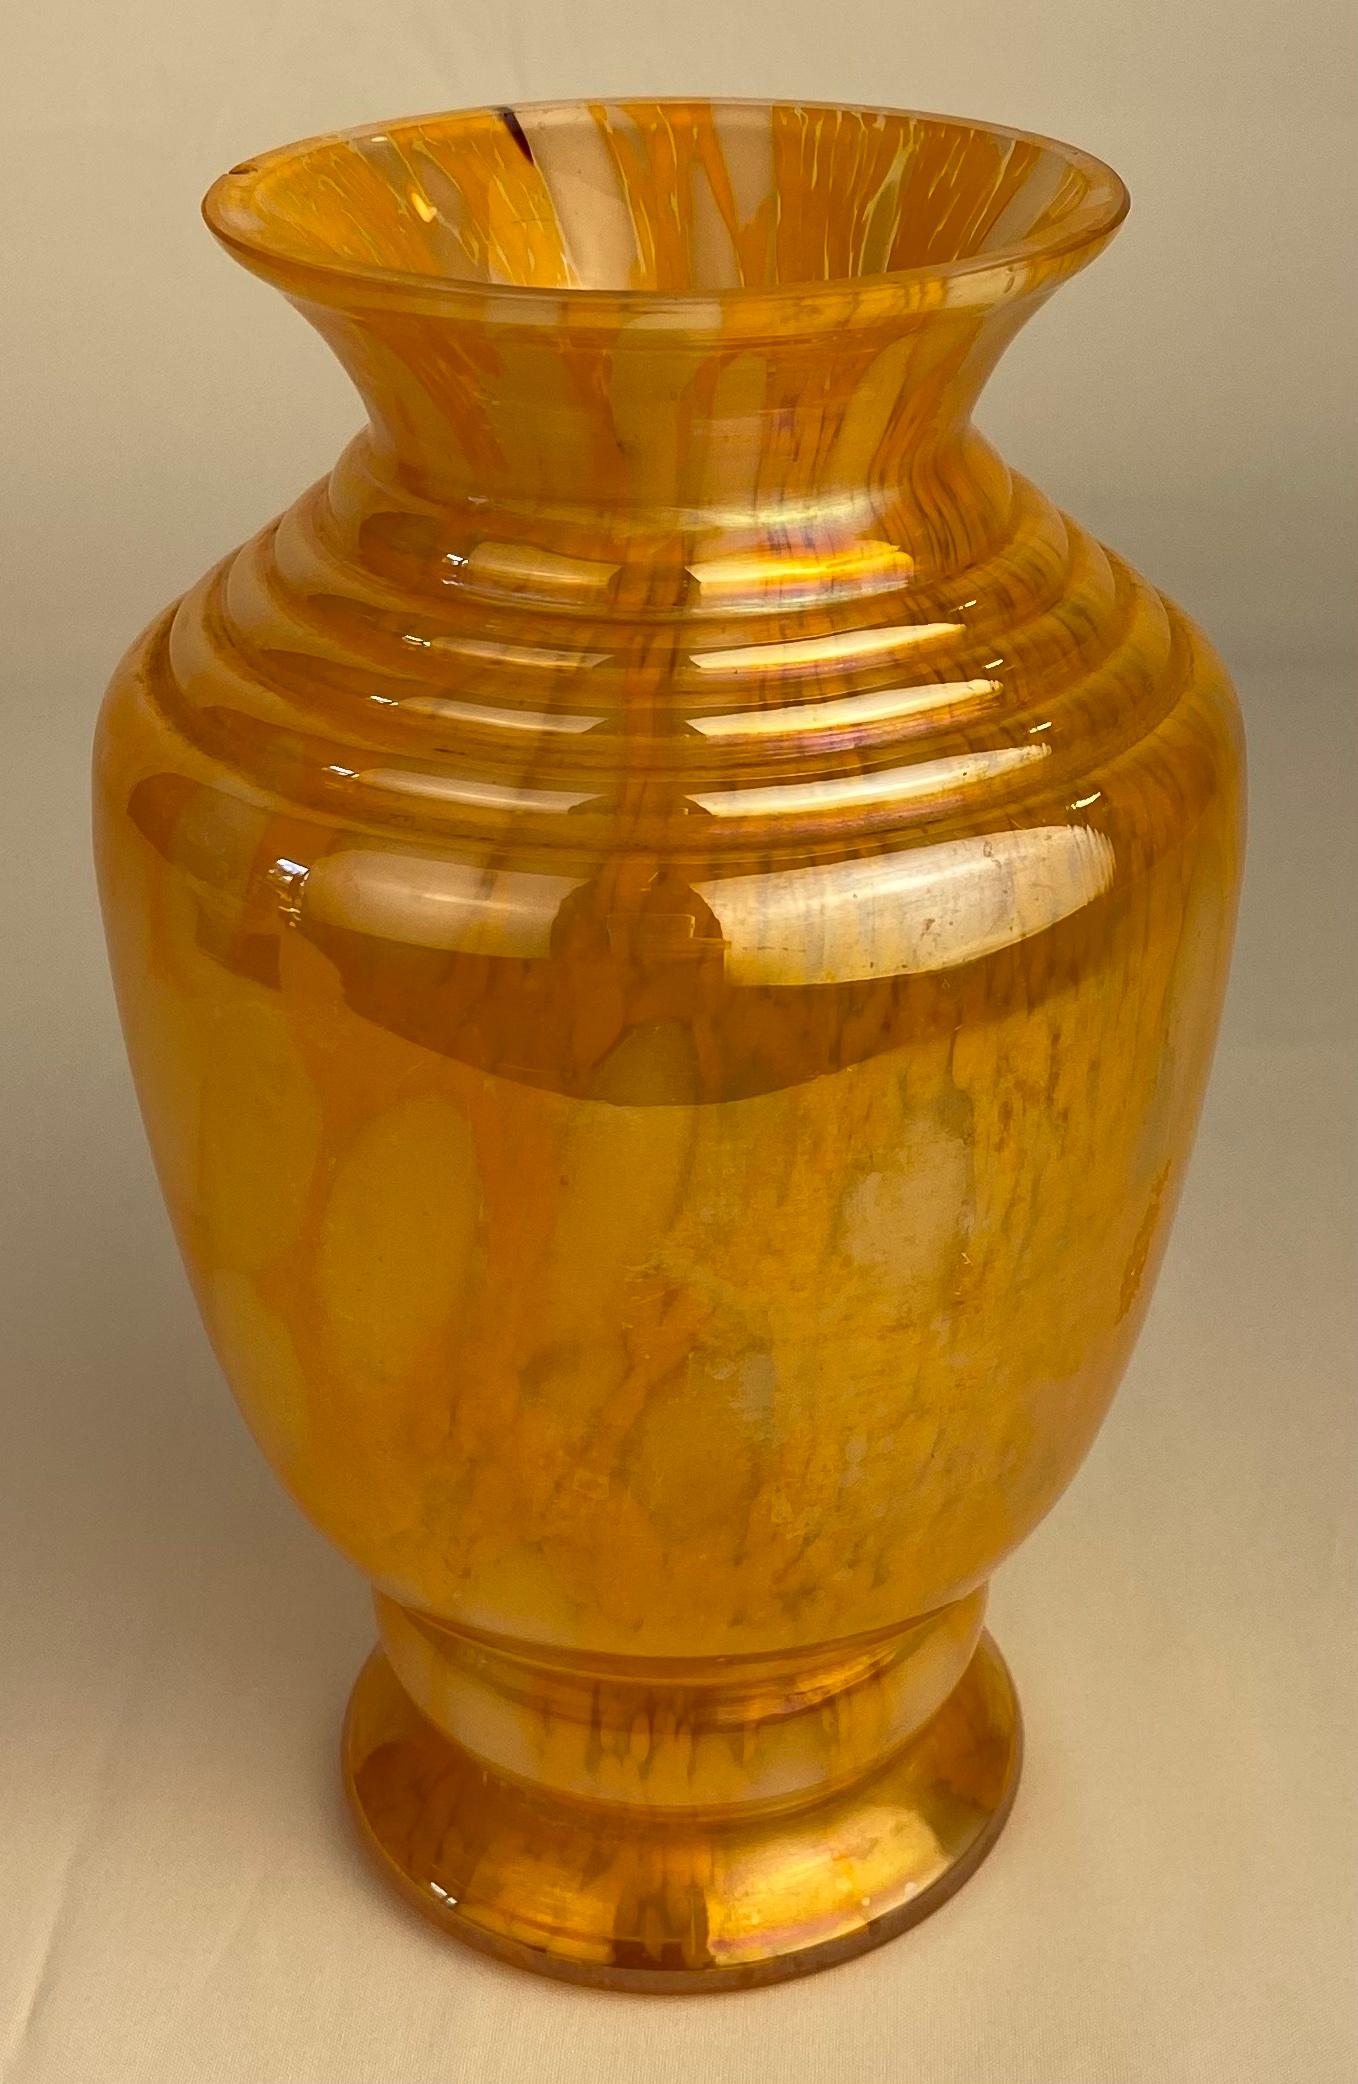 A nice quality amber colored Murano art glass vase perfect for displaying your favorite flowers. 

Very good vintage condition, no cracks or chips. 
Measures: 7 5/8